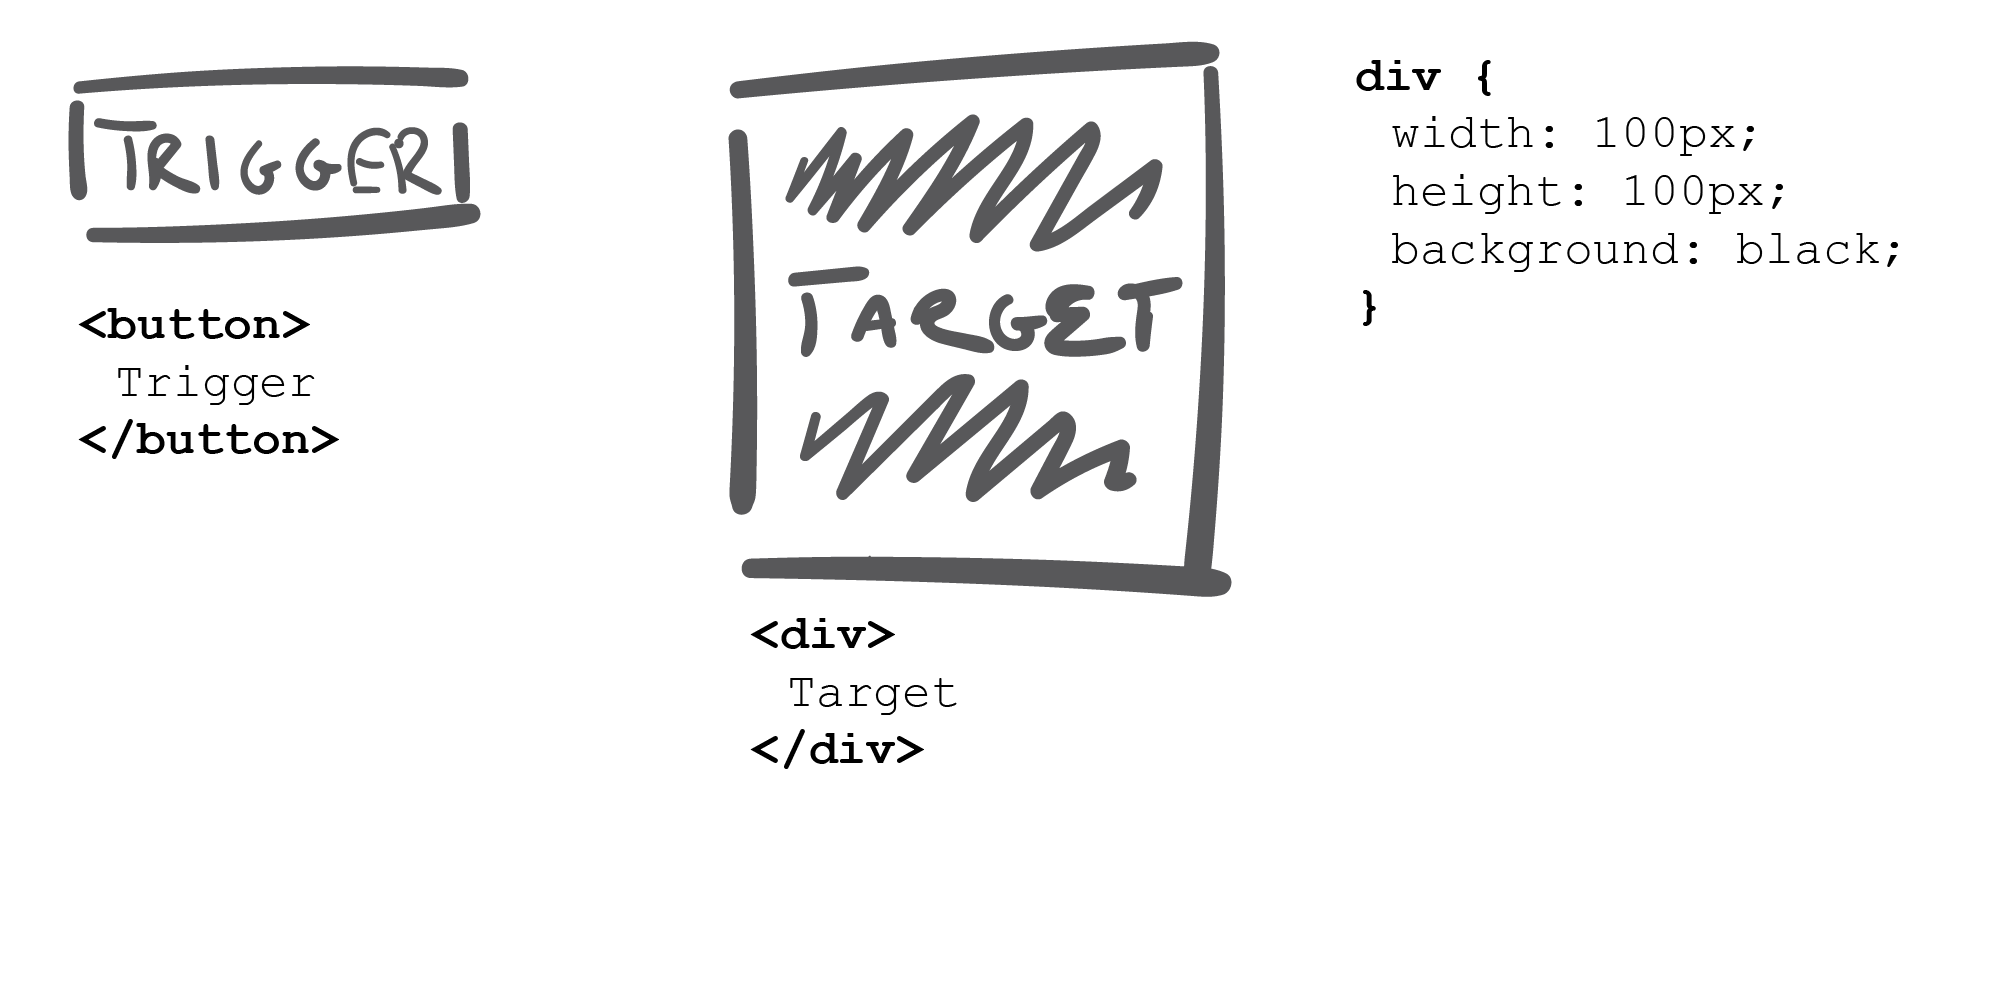 HTML and CSS for demo creating Trigger and Target Elements